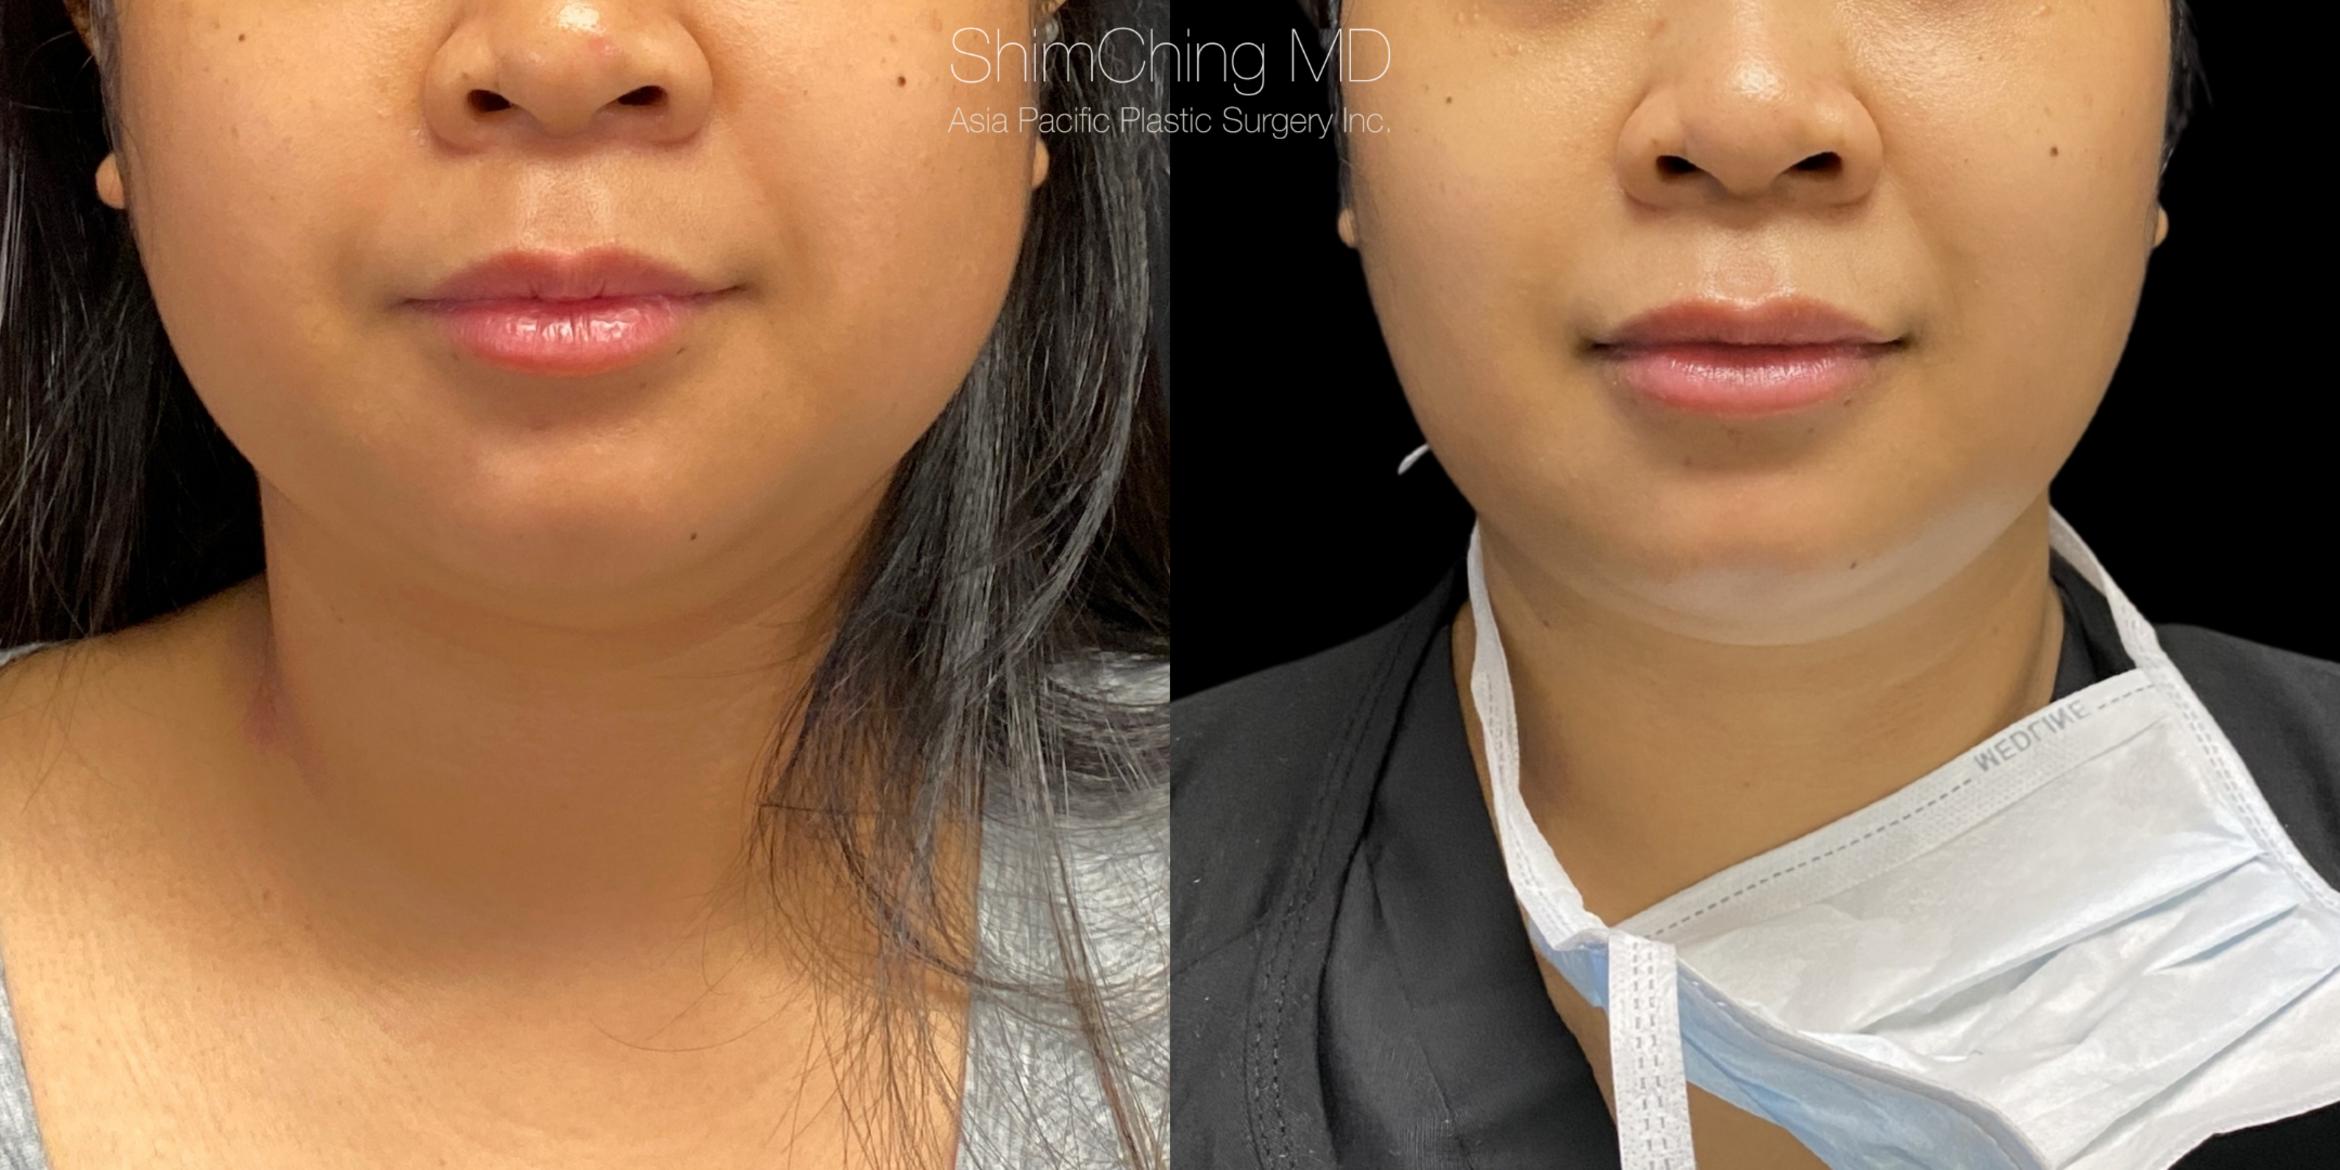 Buccal Fat Removal in Honolulu, Hawaii - Dr. Shim Ching